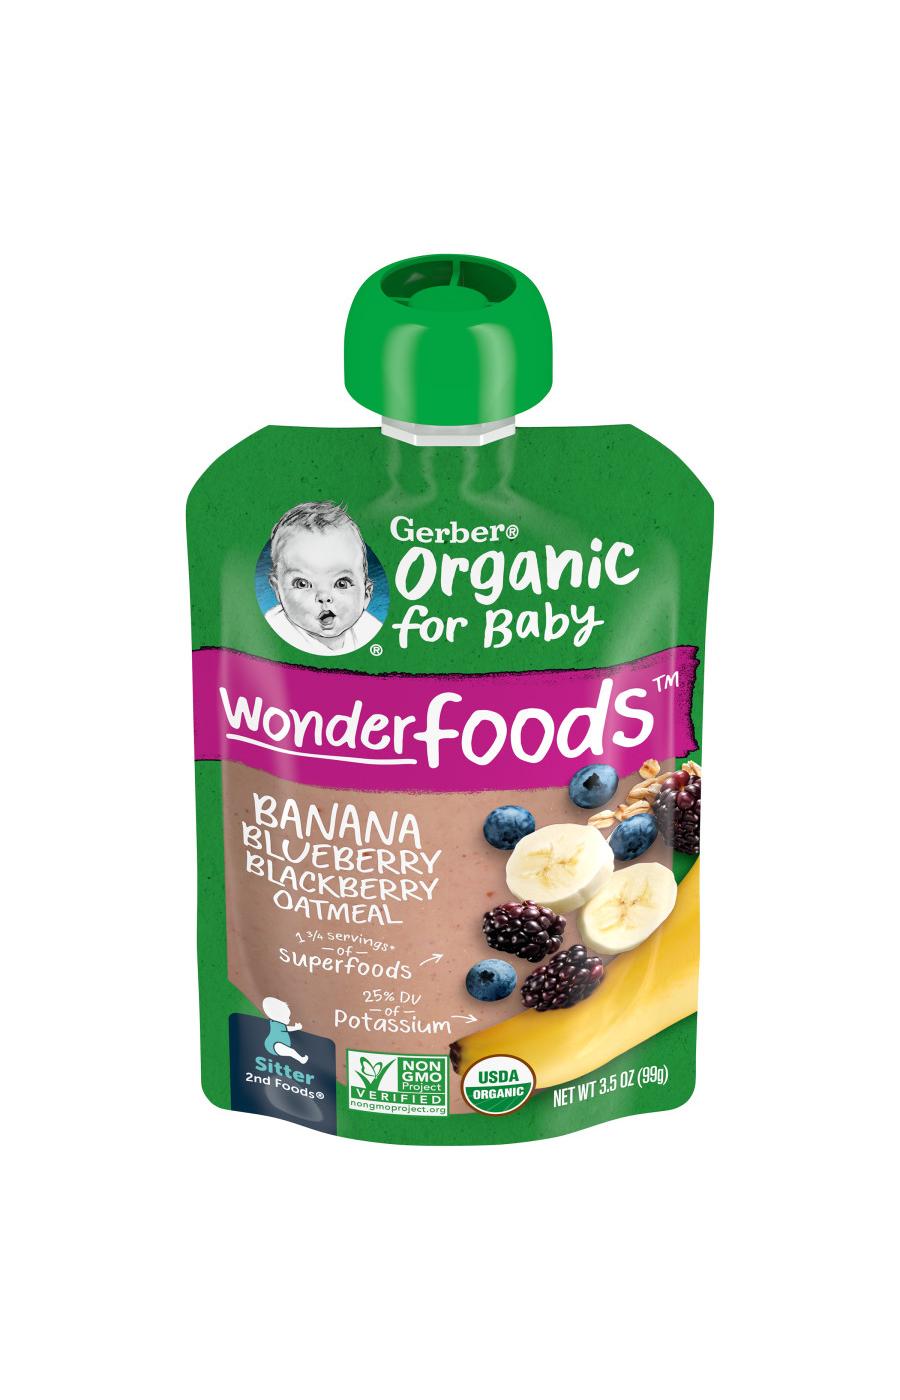 Gerber Organic for Baby Wonderfoods Pouch - Banana Blueberry Blackberry & Oatmeal; image 1 of 8